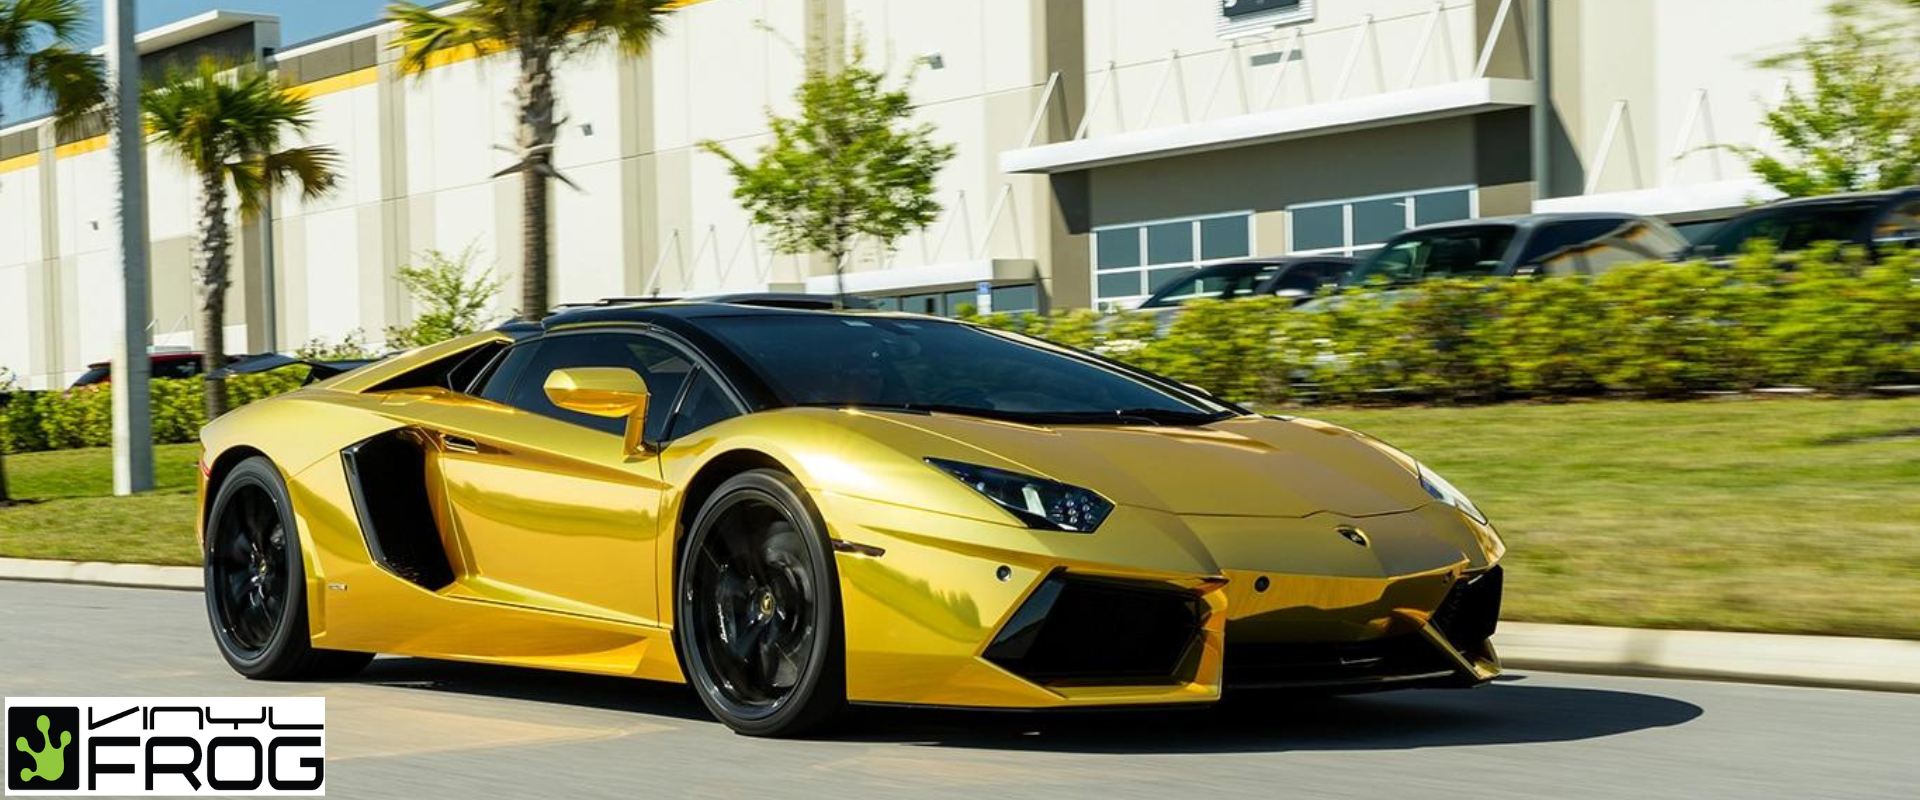 How Much Does It Cost To Wrap A Car Gold?